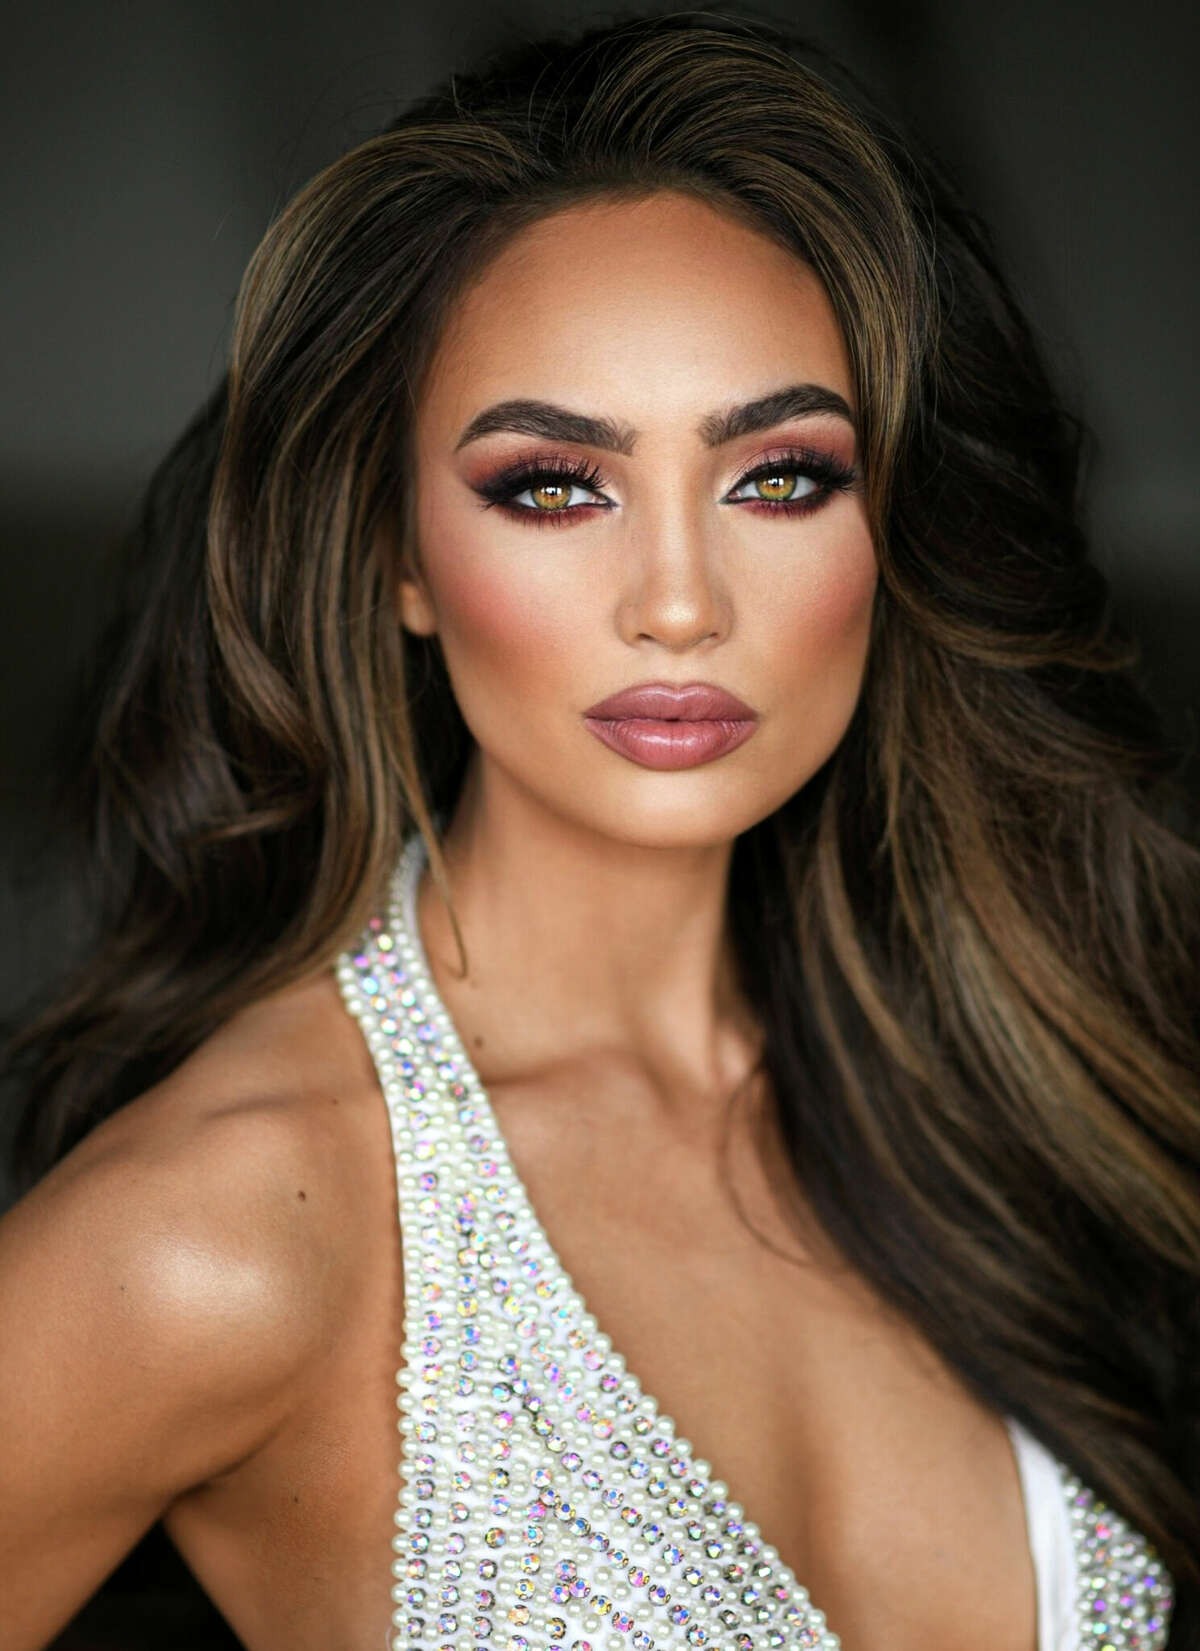 Friendswood residents have given mixed reactions to reported statements from new Miss USA R'Bonney Gabriel that criticize Texas' law on abortion.